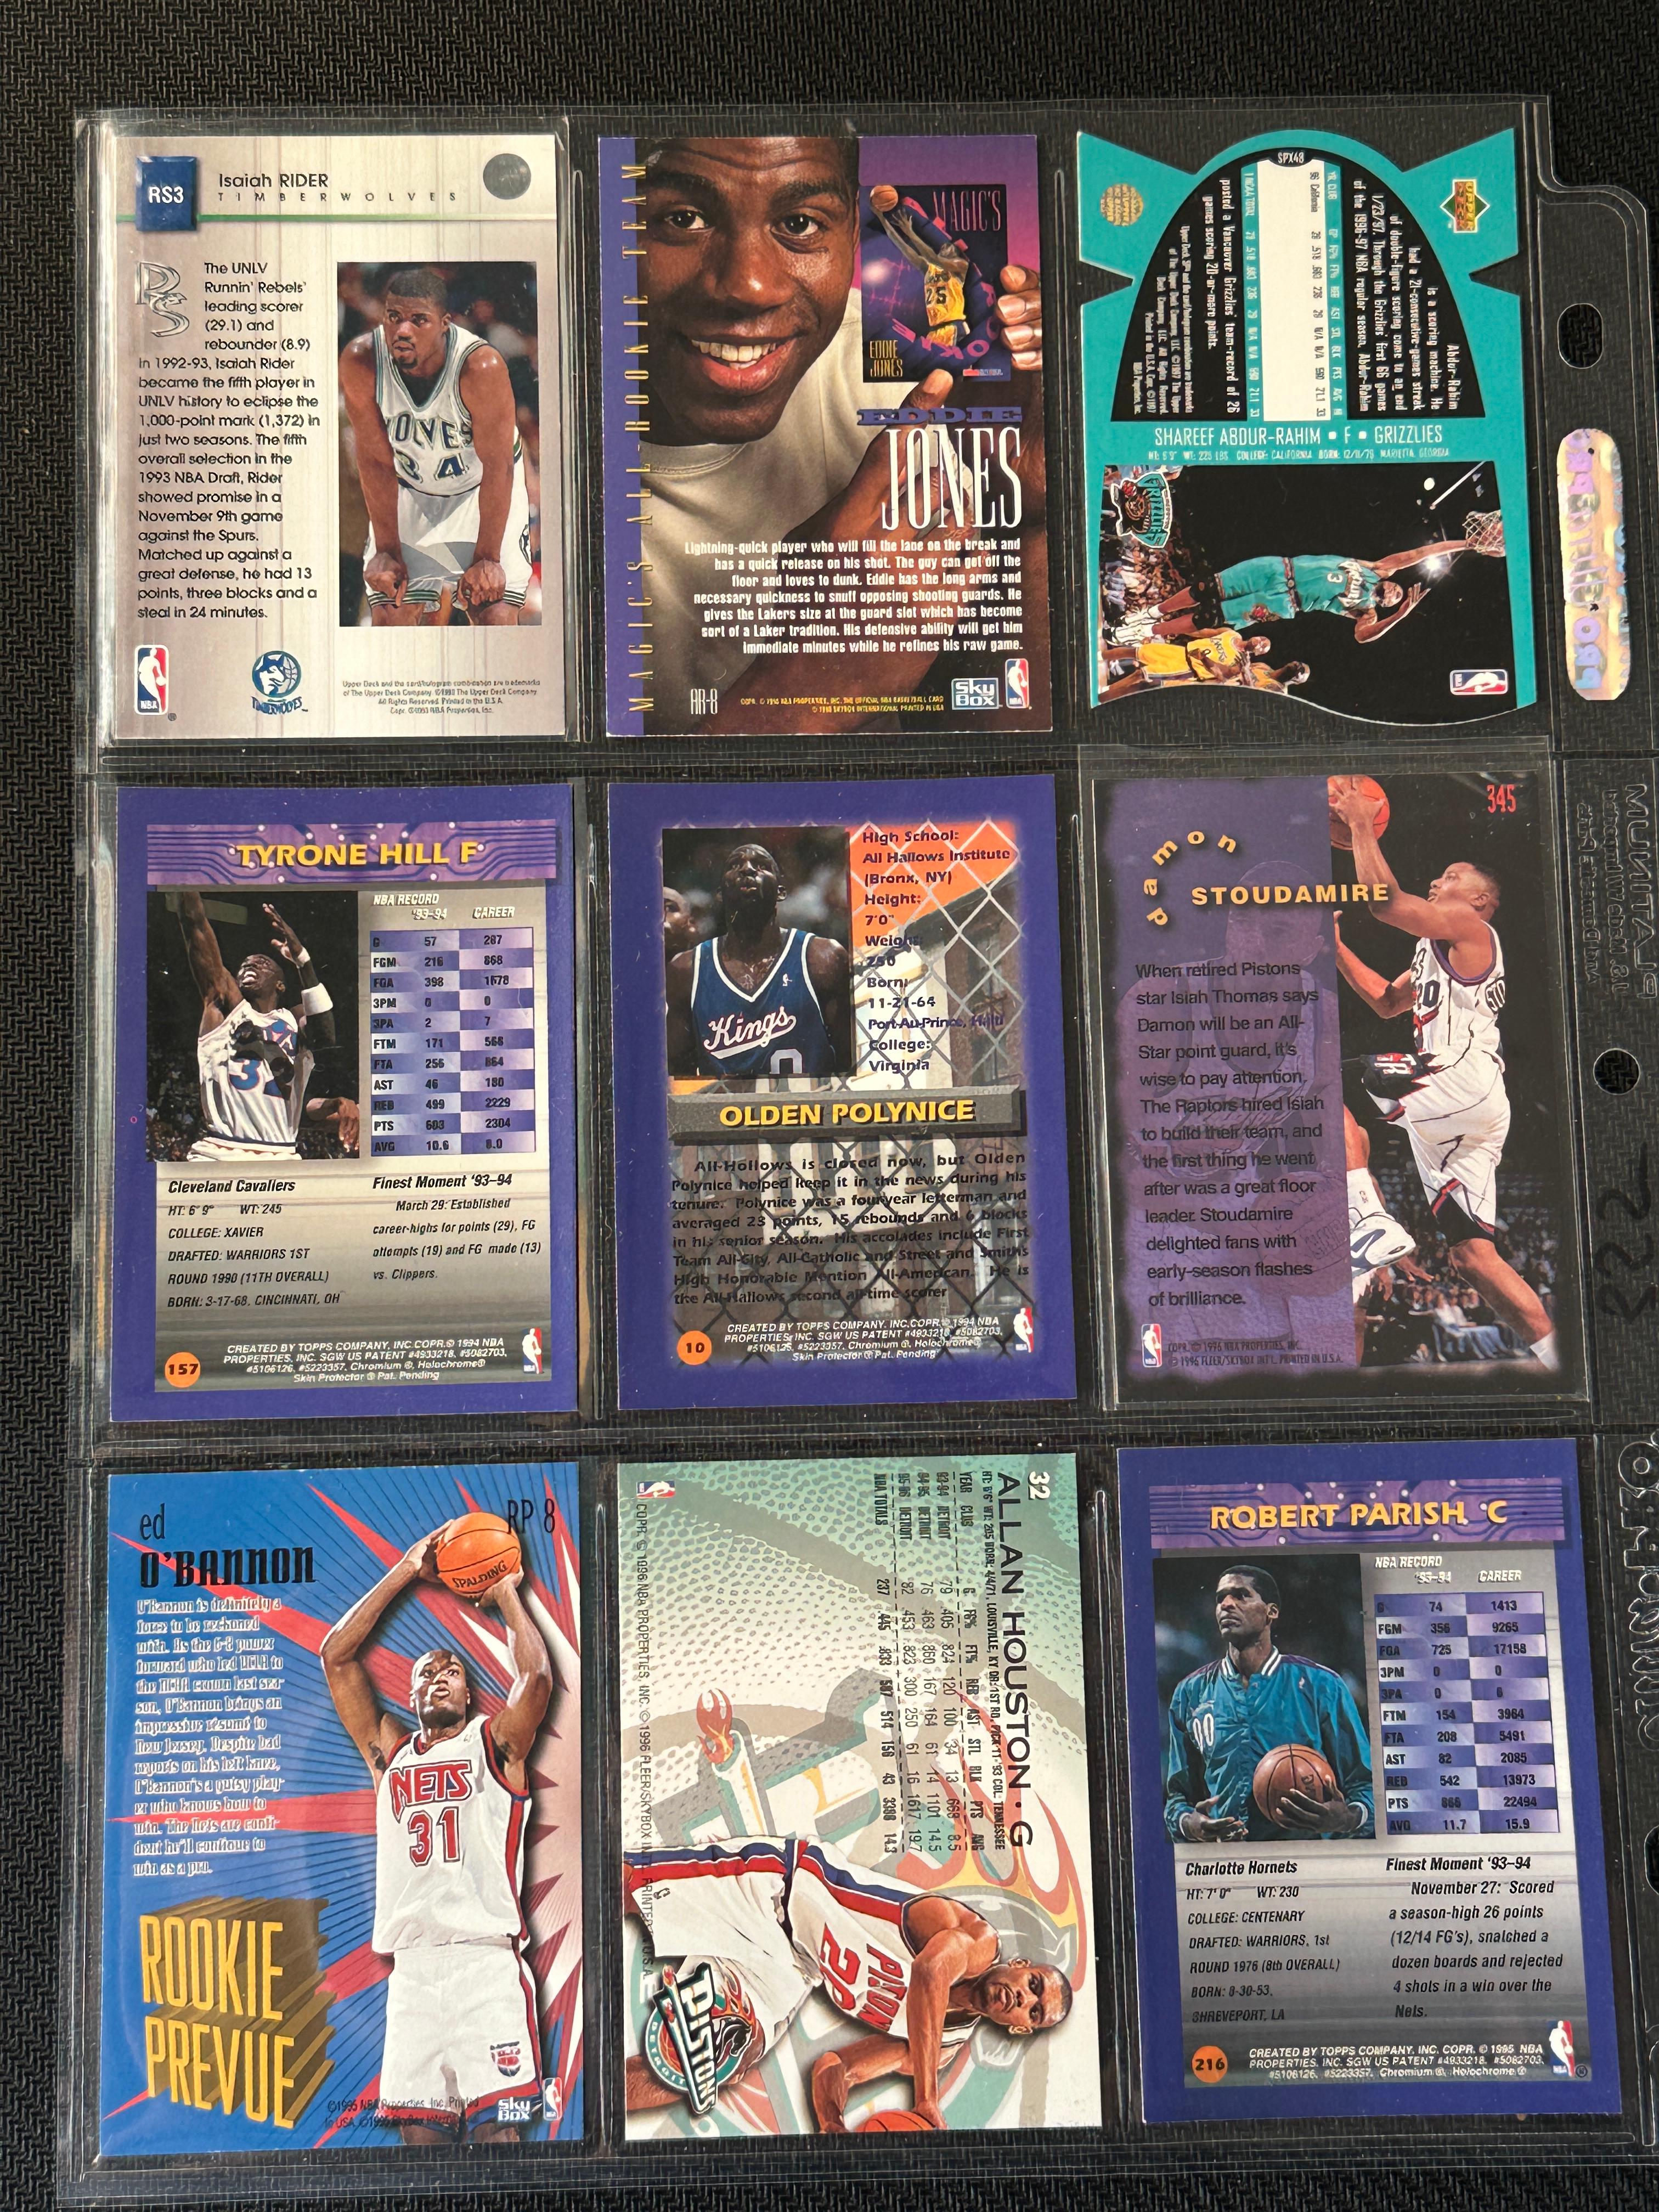 9 Card Basketball Lot in Pages - Different Players, years, conditions